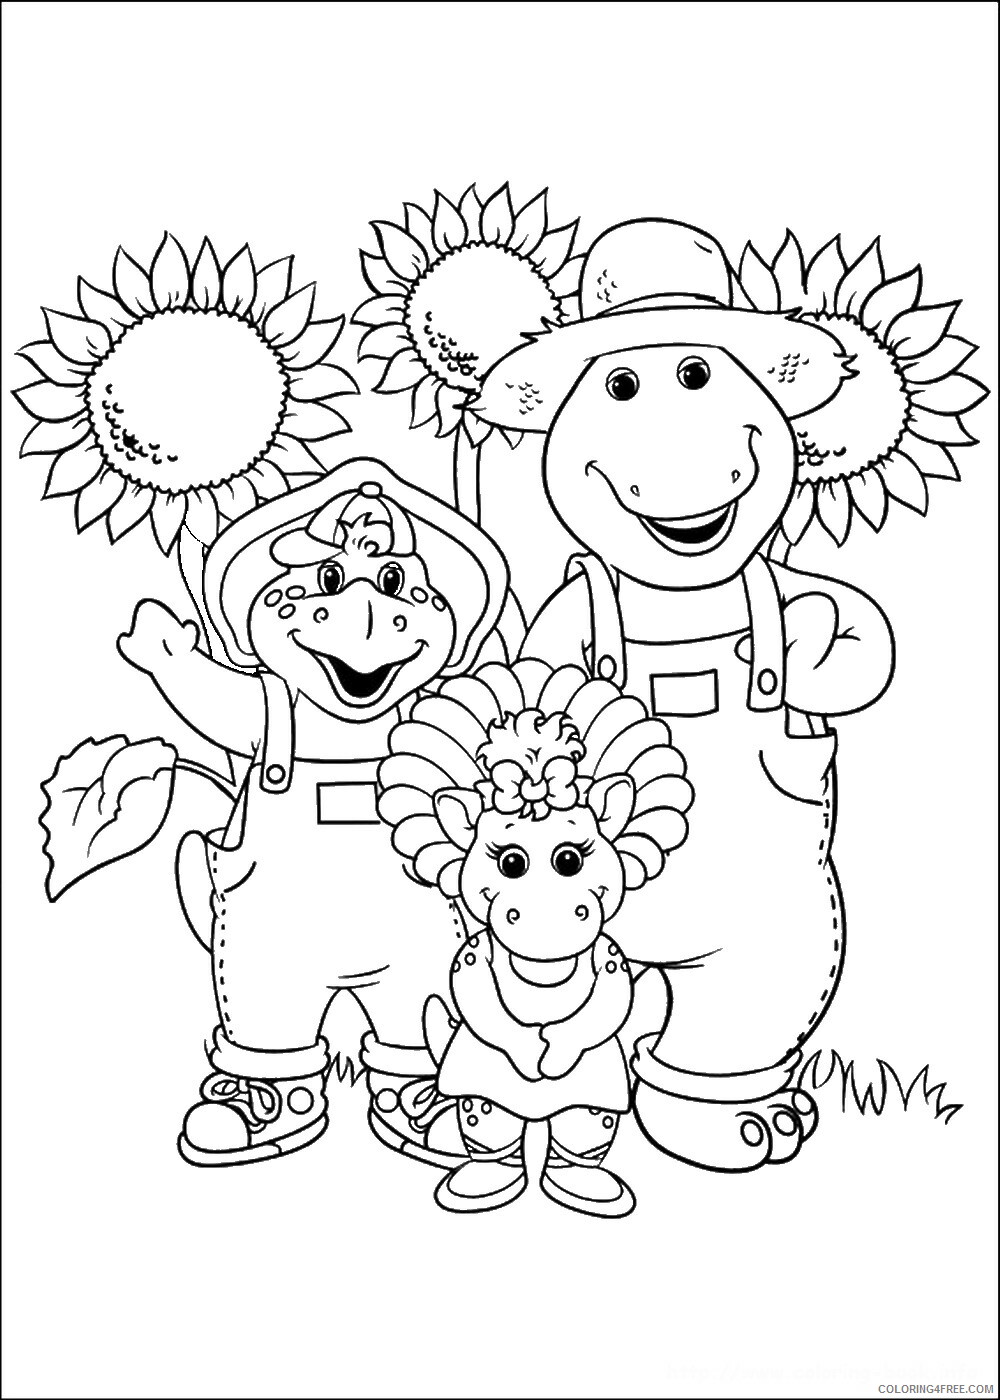 Barney and Friends Coloring Pages TV Film barney_cl_1044 Printable 2020 00617 Coloring4free